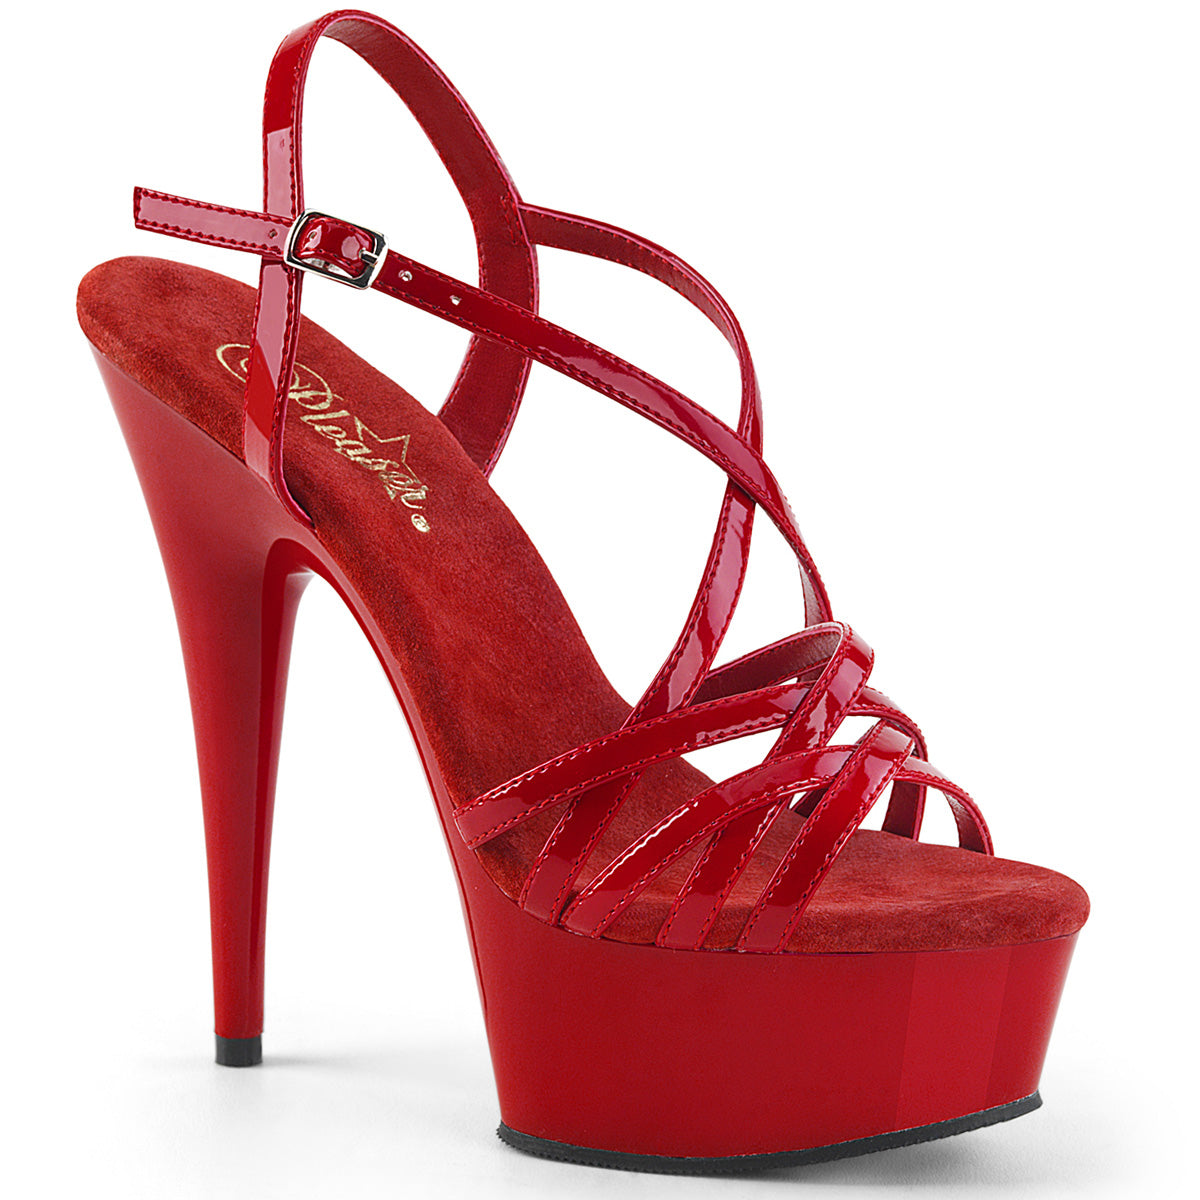 Pleaser Womens Sandals DELIGHT-613 Red Pat/Red